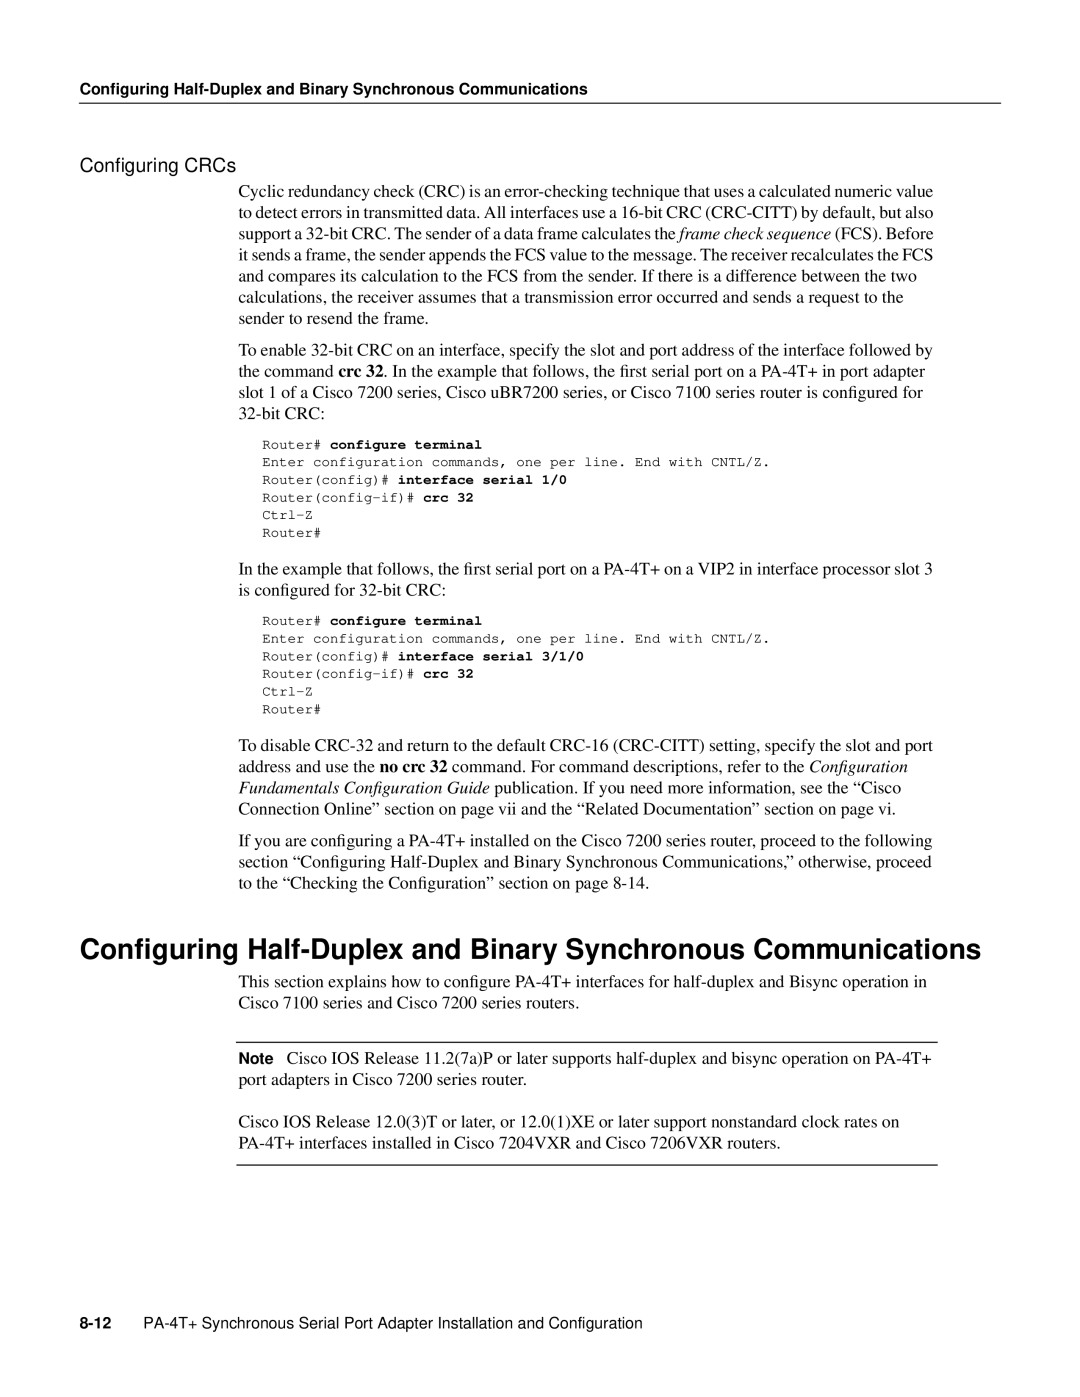 Cisco Systems PA-4T manual Conﬁguring Half-Duplex and Binary Synchronous Communications, Conﬁguring CRCs 